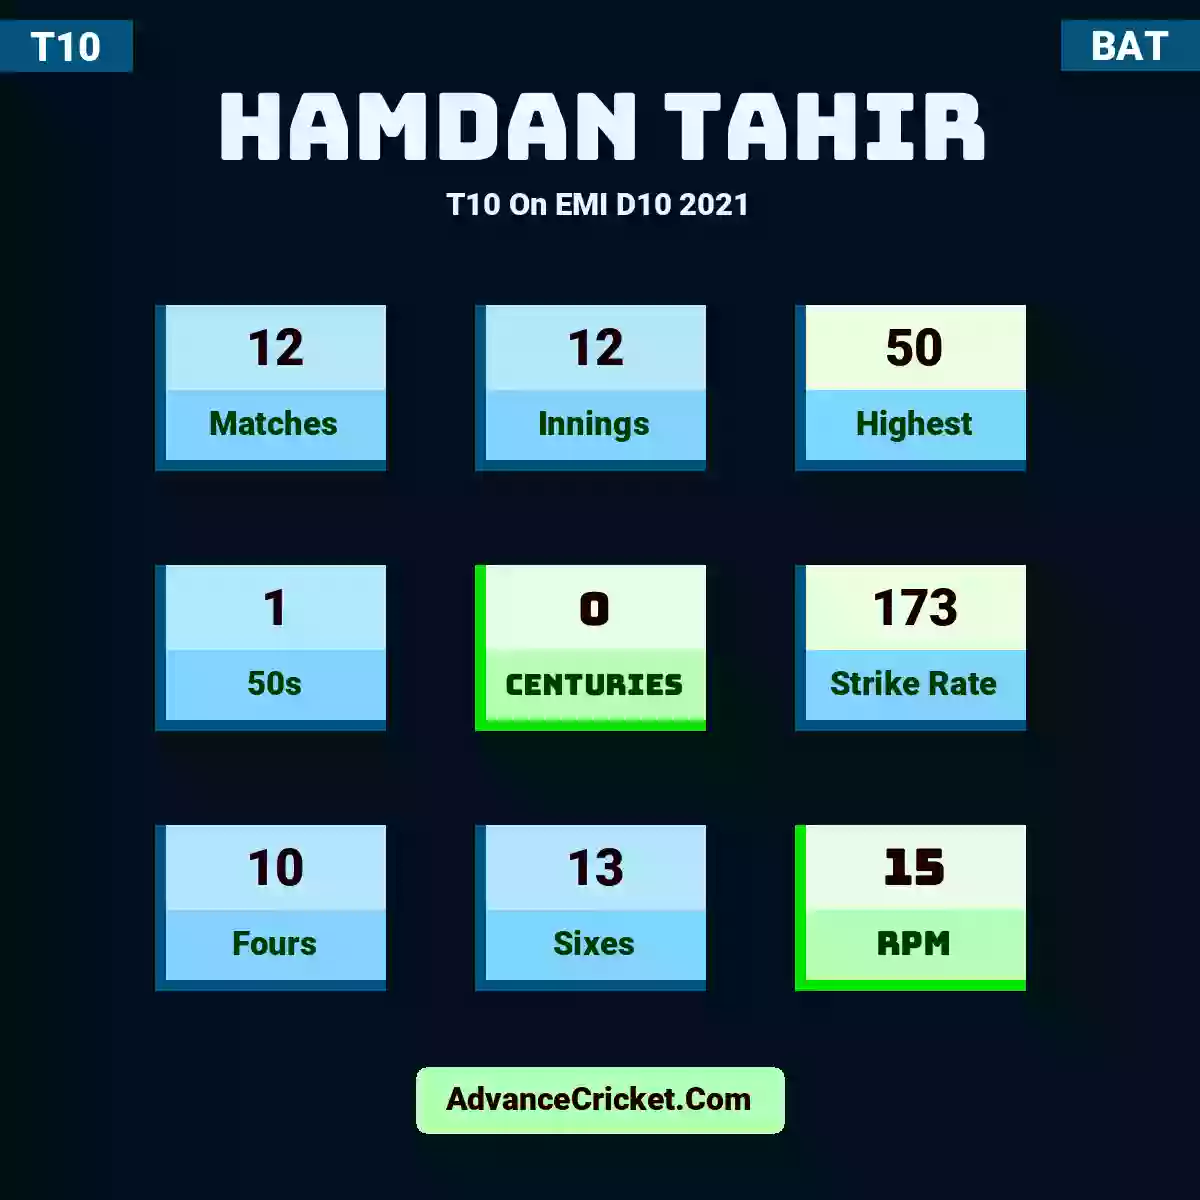 Hamdan Tahir T10  On EMI D10 2021, Hamdan Tahir played 12 matches, scored 50 runs as highest, 1 half-centuries, and 0 centuries, with a strike rate of 173. H.Tahir hit 10 fours and 13 sixes, with an RPM of 15.